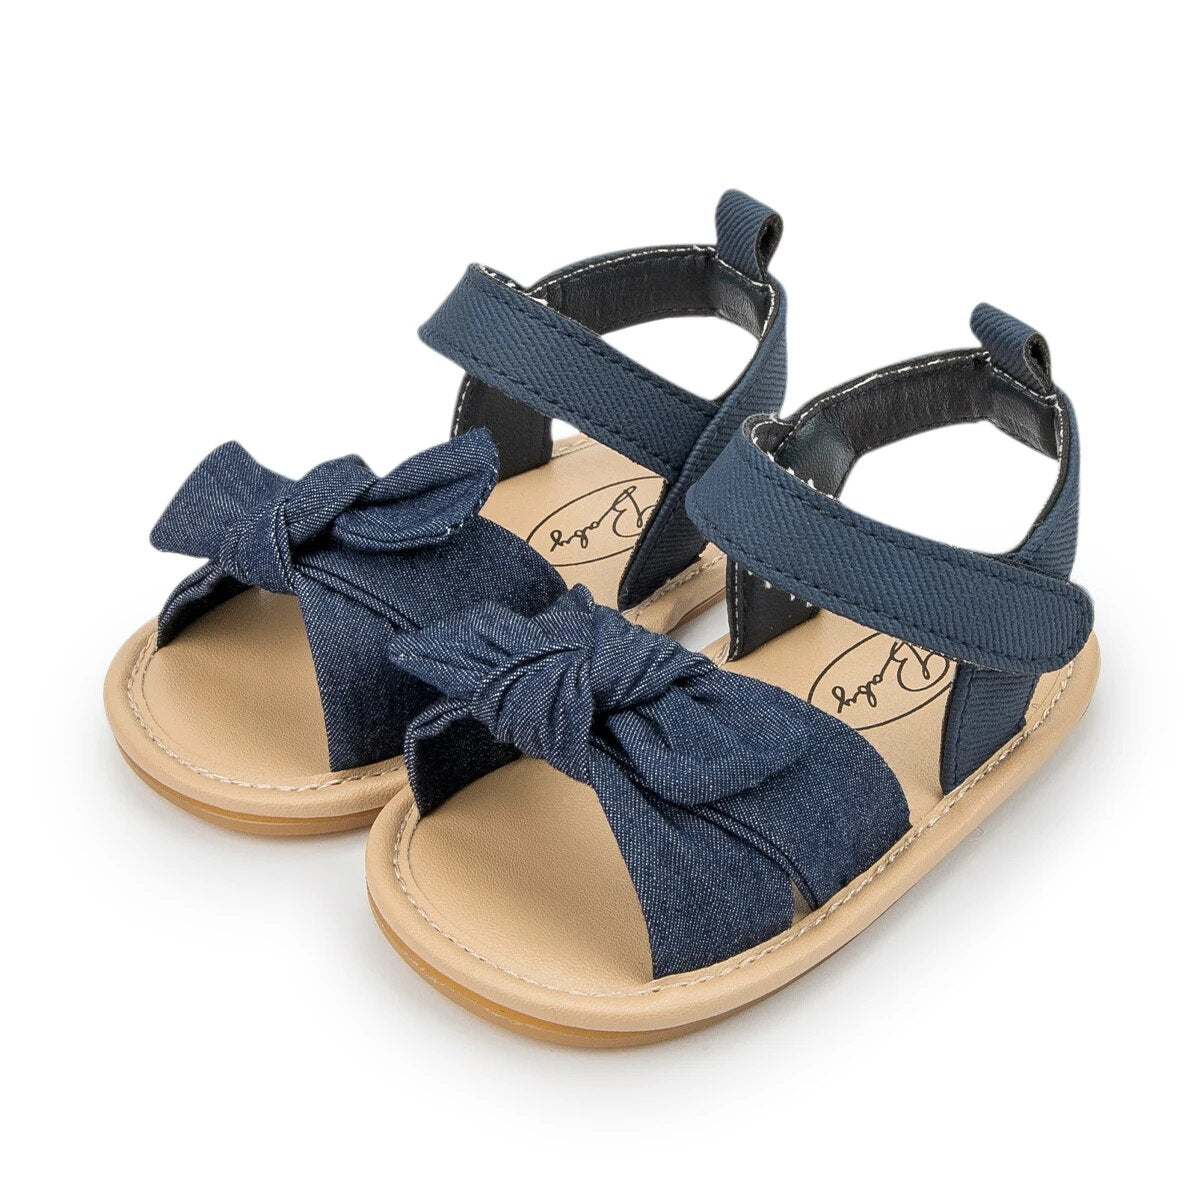 Baby Girl Summer Sandals Shoes Solid Anti-slip Soft Newborns Bow Classic First Walkers Infant Crib Shoes - BGSD50776